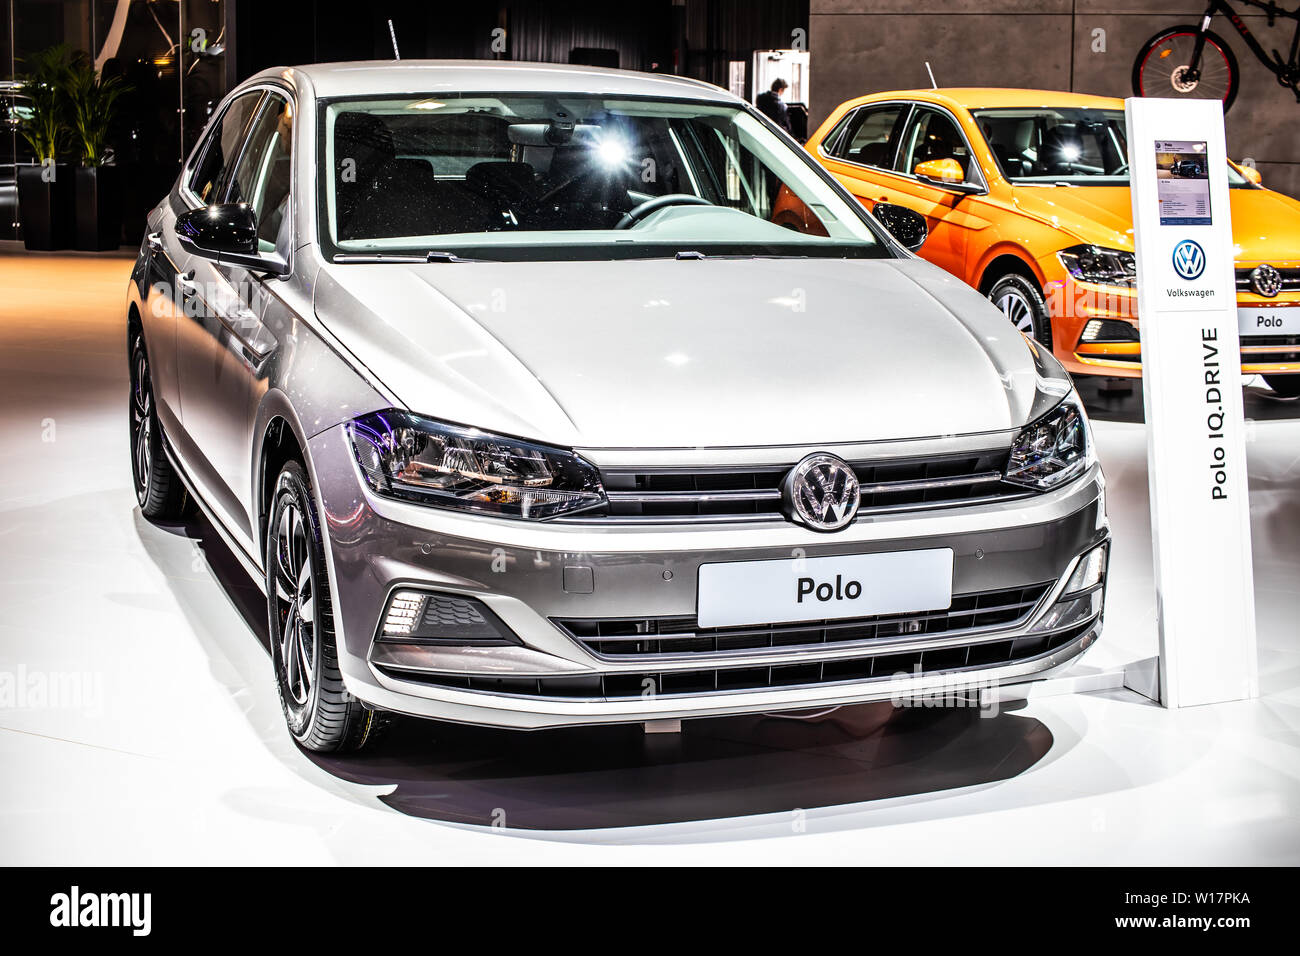 linen base Melodic Brussels, Belgium, Jan 2019: Volkswagen VW Polo at Brussels Motor Show,  Sixth generation, Typ AW, MQB A0 platform, produced by Volkswagen Group  Stock Photo - Alamy